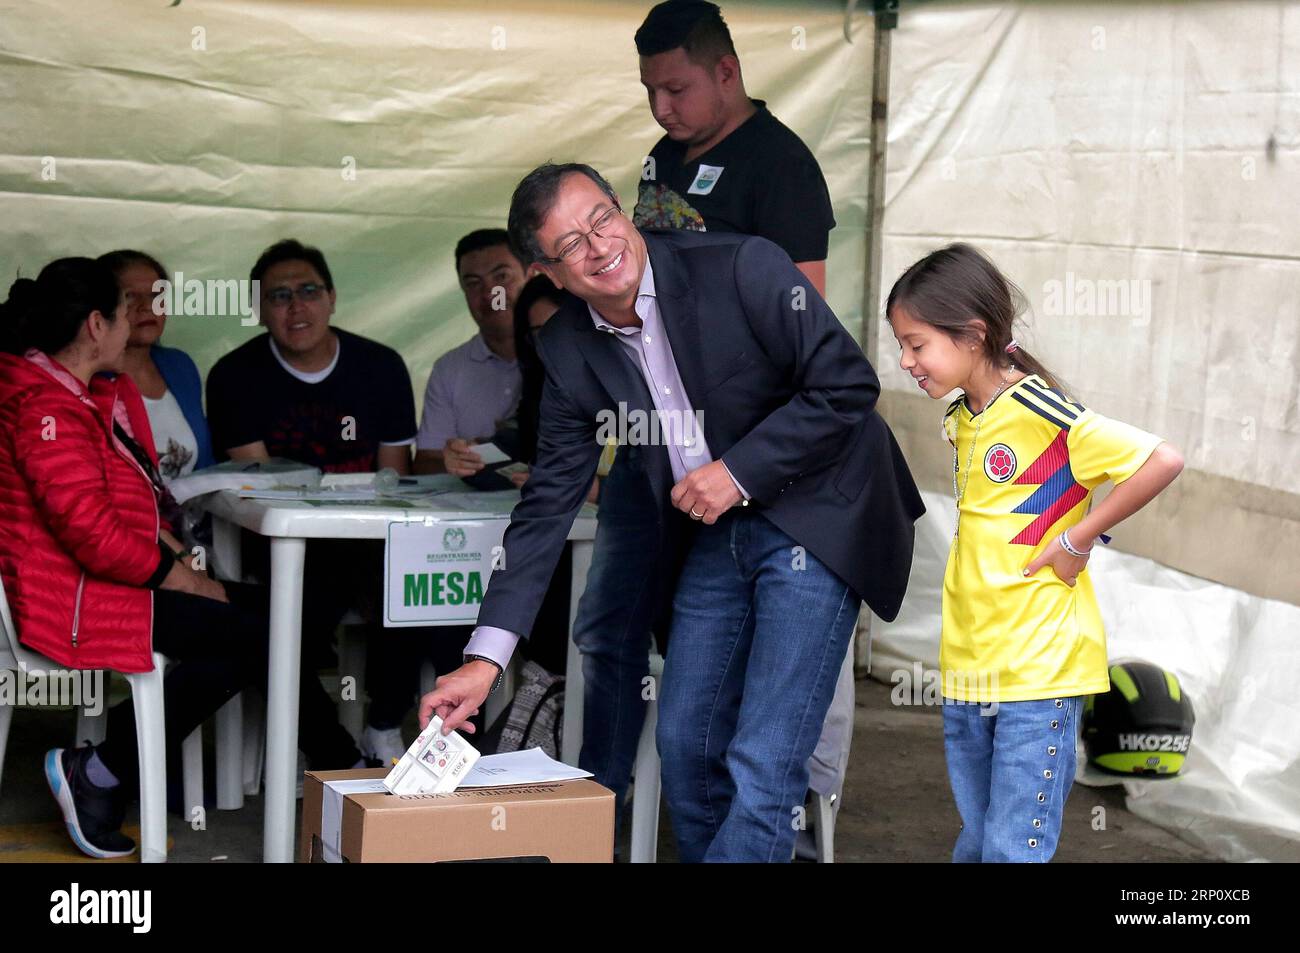 (180528) -- BOGOTA, May 28, 2018 -- Colombian presidential candidate for the Humane Colombia Movement Gustavo Petro (Front L) casts his vote at a polling station in Bogota, Colombia, on May 27, 2018. Ivan Duque, right-wing candidate for the Democratic Center Party, won the first round of the Colombian presidential election on Sunday, claiming 39.14 percent of the vote with 99.99 percent of votes tallied. The second round will take place on June 17. Diego Pineda/) (rtg) (ah) ***MANDATORY CREDIT*** ***NO SALES-NO ARCHIVE*** ***EDITORIAL USE ONLY*** ***COLOMBIA OUT*** COLOMBIA-BOGOTA-PRESIDENTIAL Stock Photo